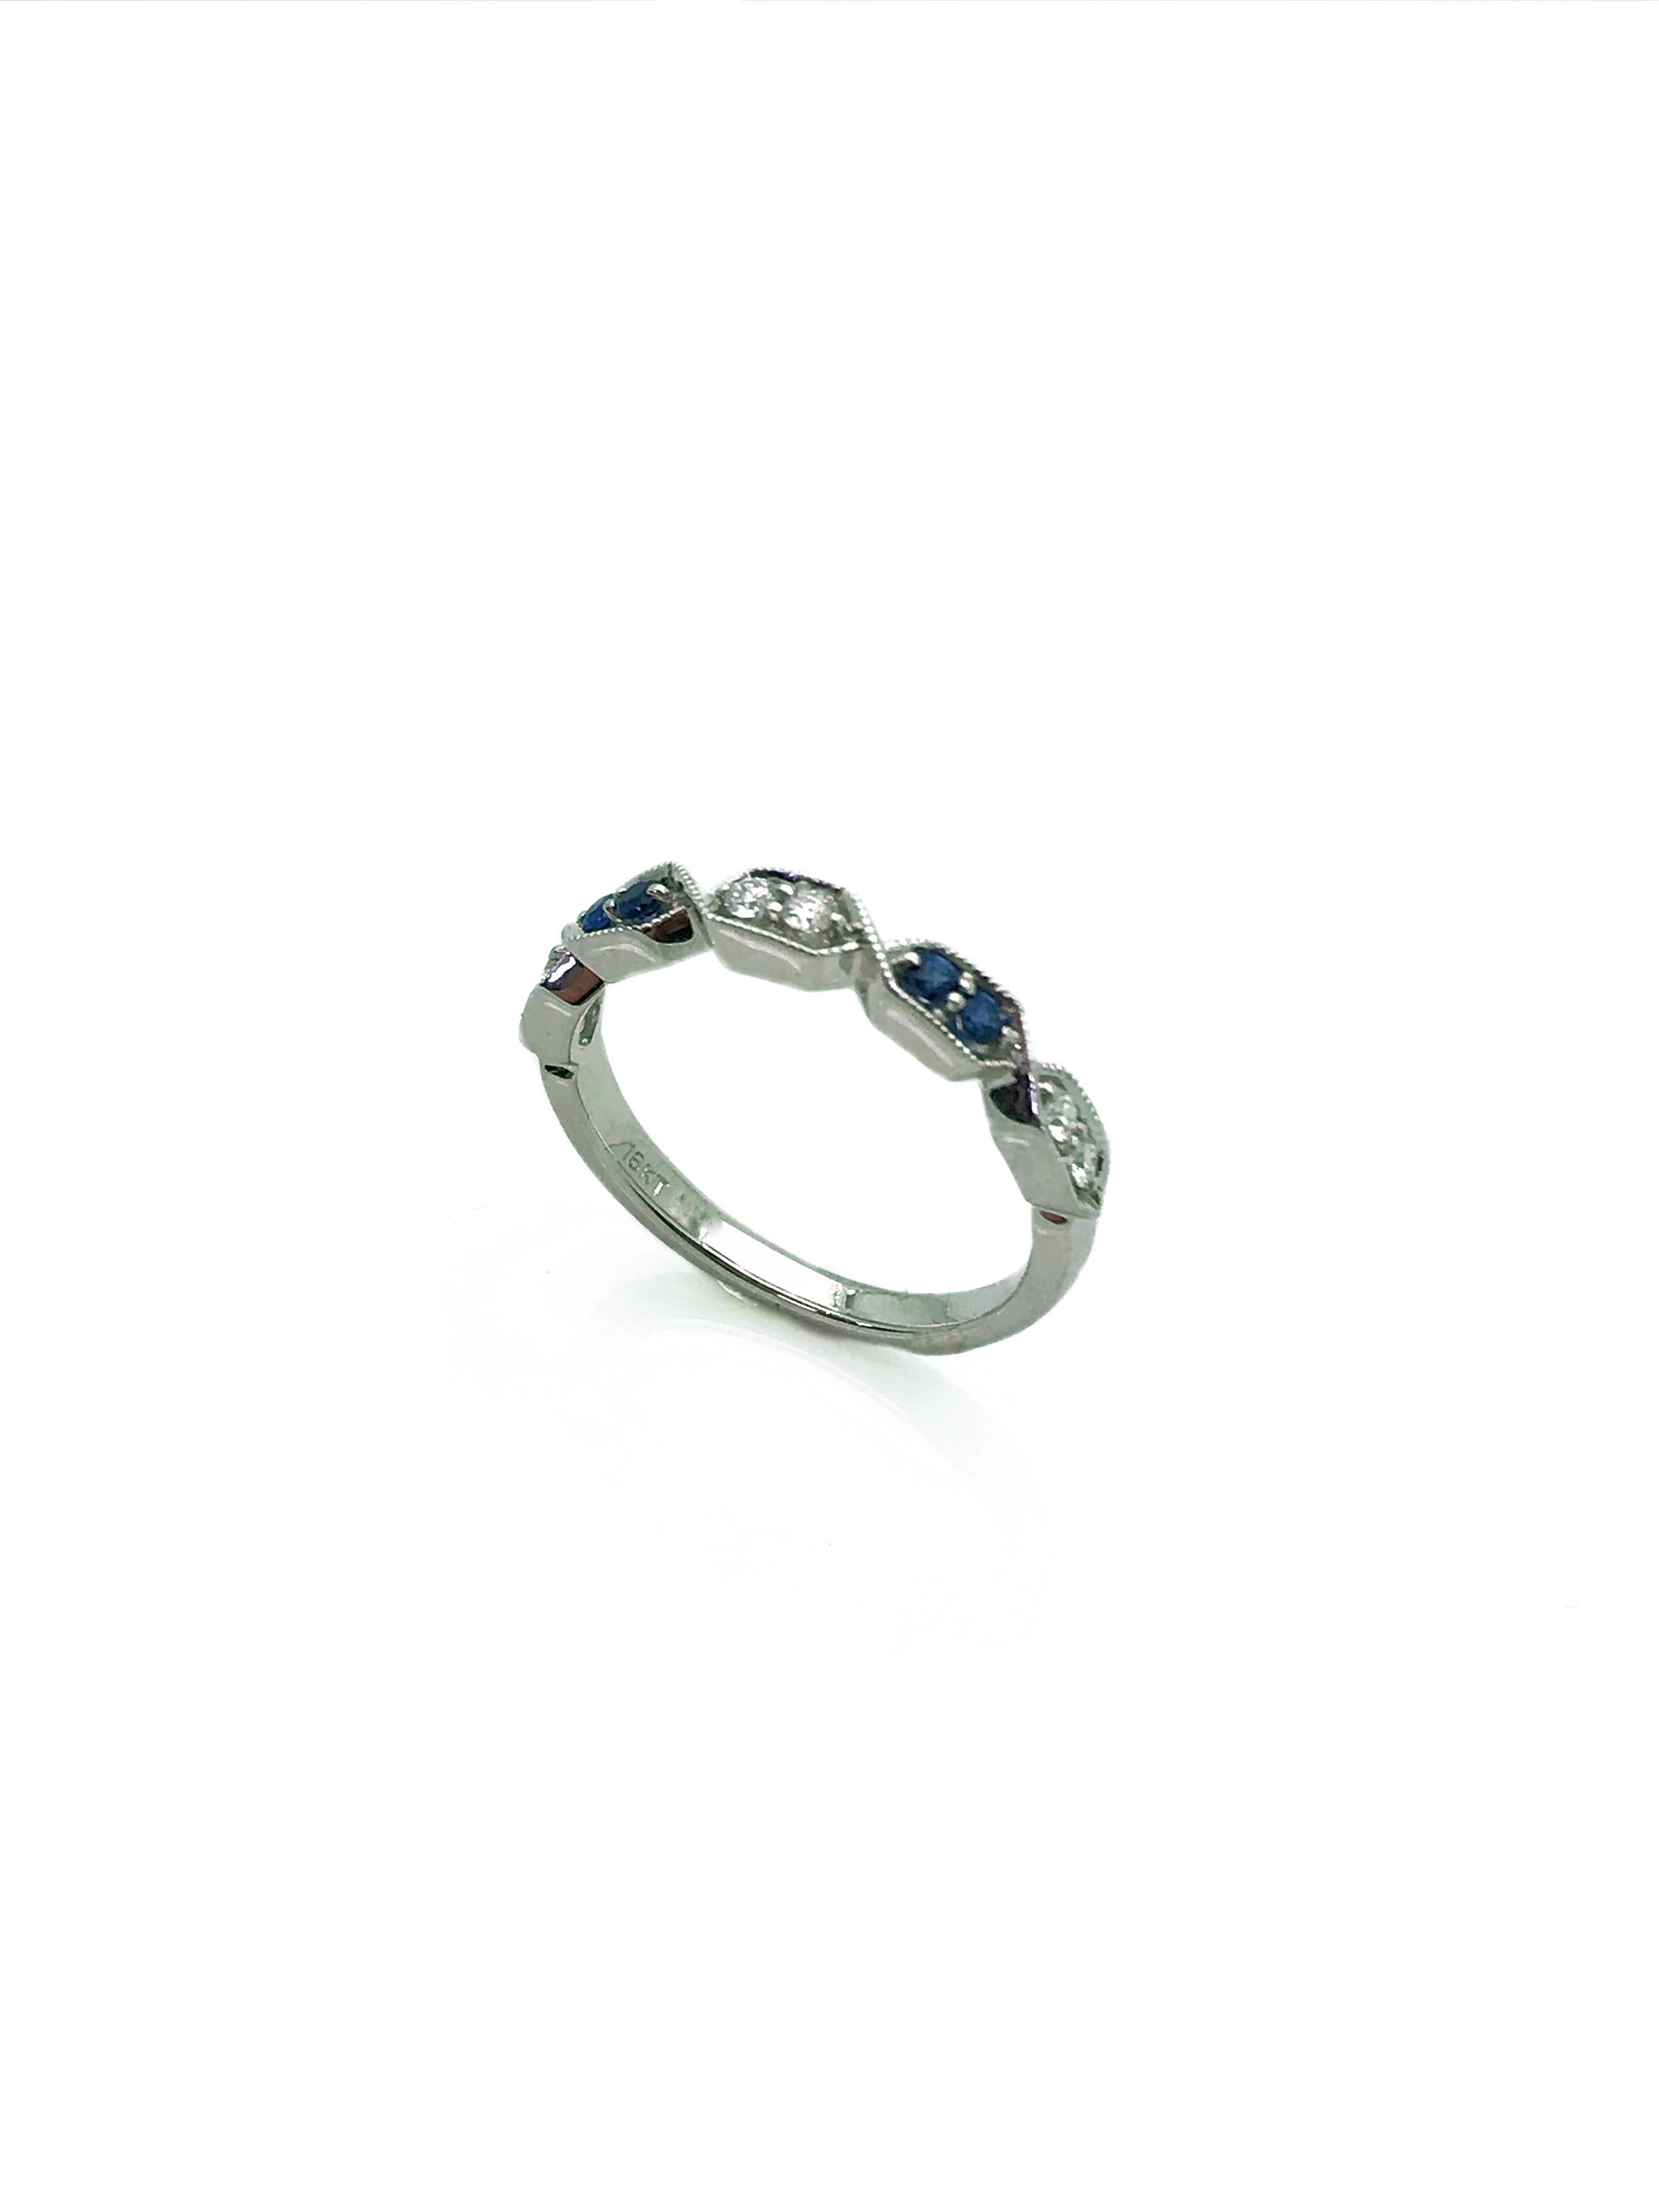 Round Cut Sapphire and Diamond Band Ring, White Gold, Anniversary Band For Sale